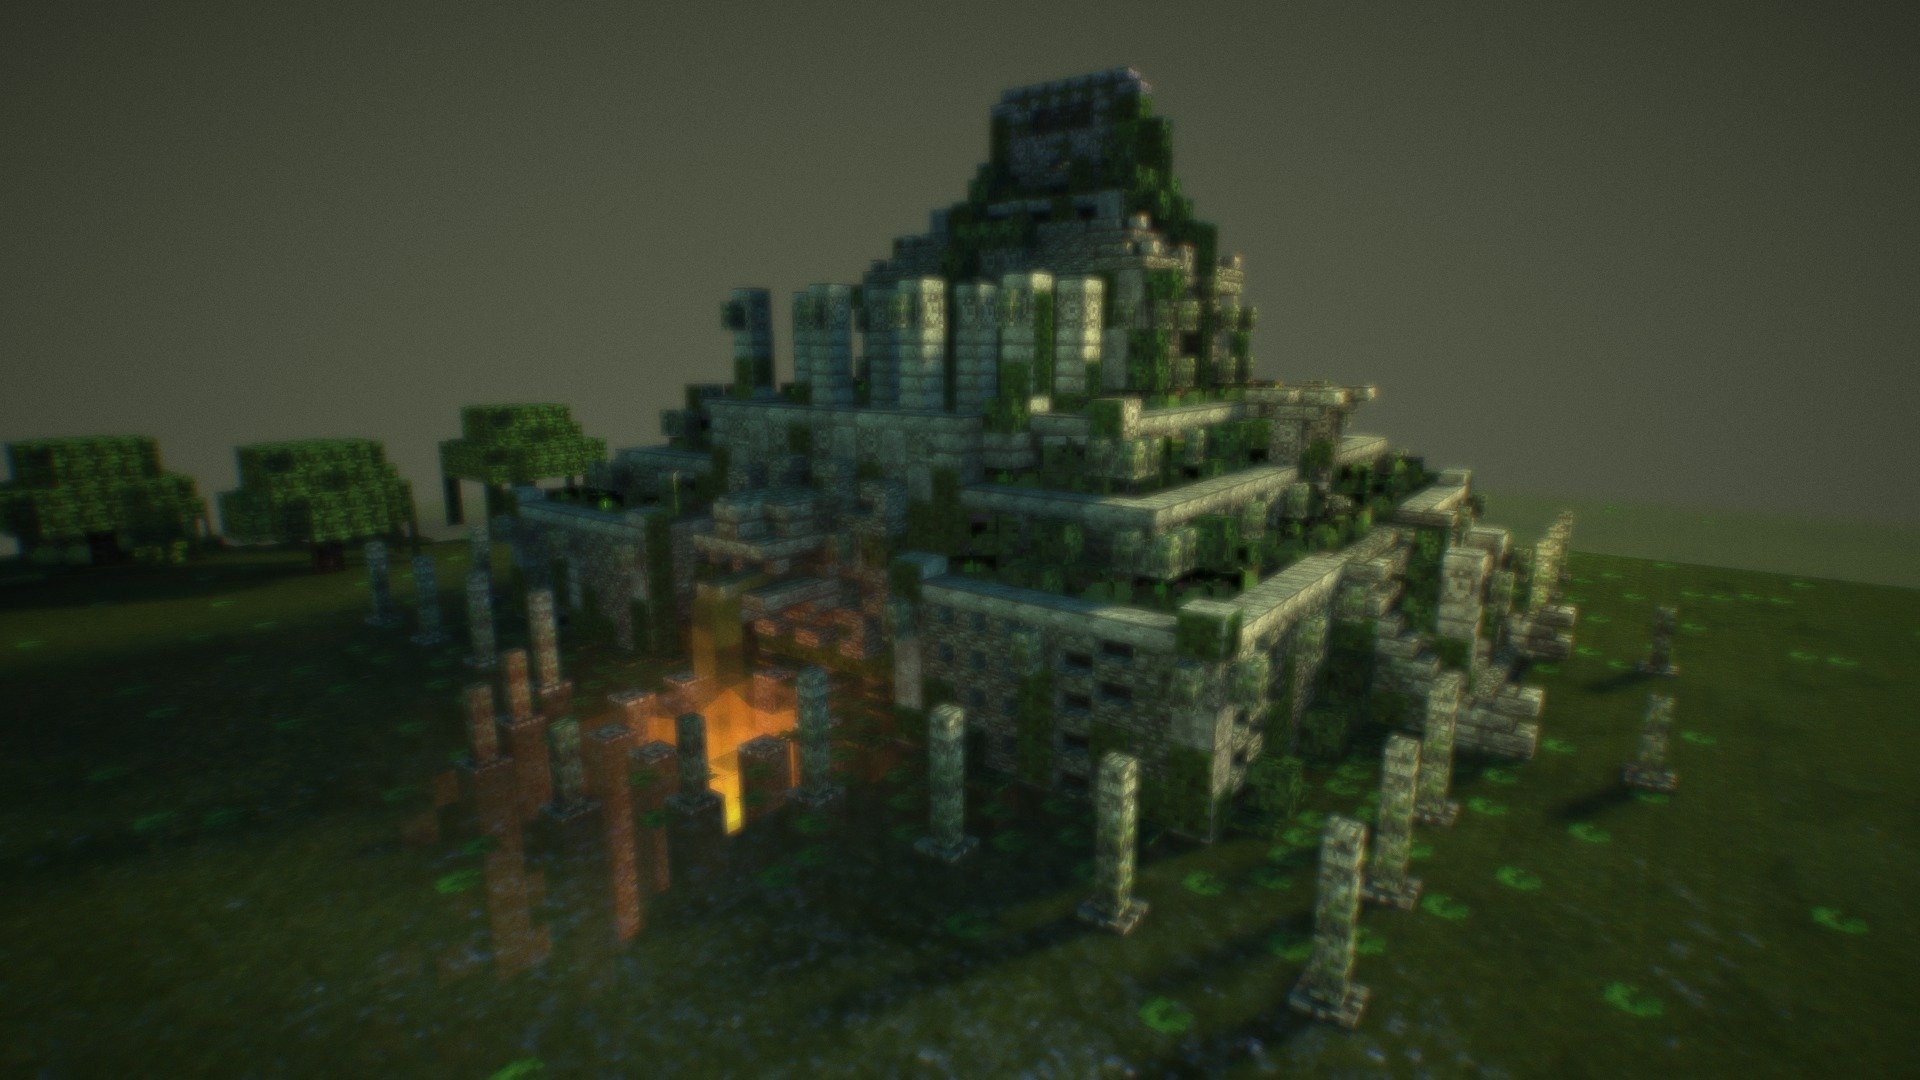 This is a build that I use as a PVP arena on my friend's server.


Map download:
http://www.mediafire.com/download/8voqk58w89d7p5f/Maya_Temple.rar

minecraft 1.7+ with Conquest texturepack


The export has lots of holes and errors, but I'm satisfied with the result 3d model